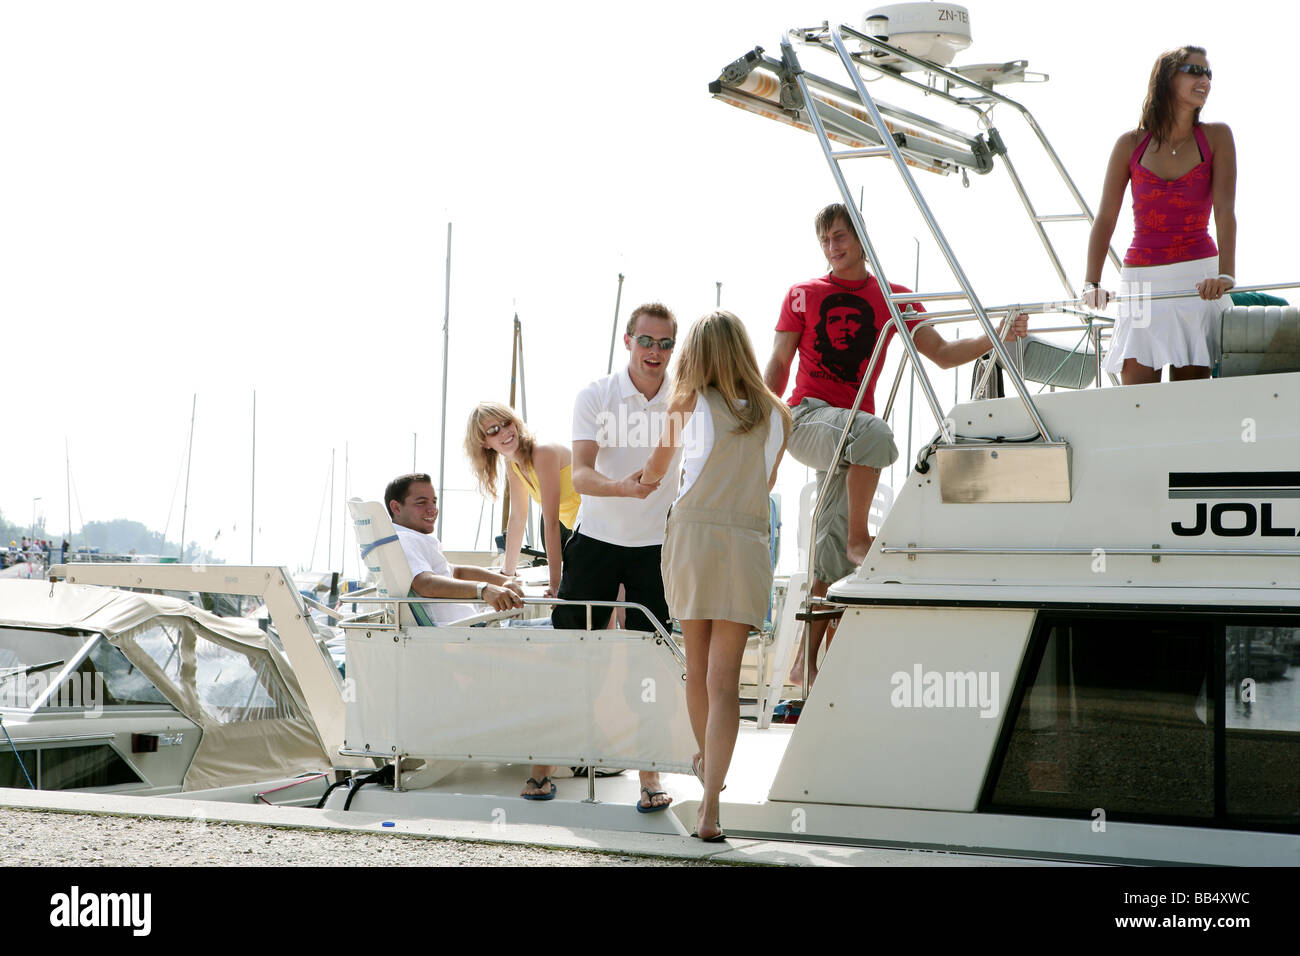 young group on a yacht in a port Stock Photo